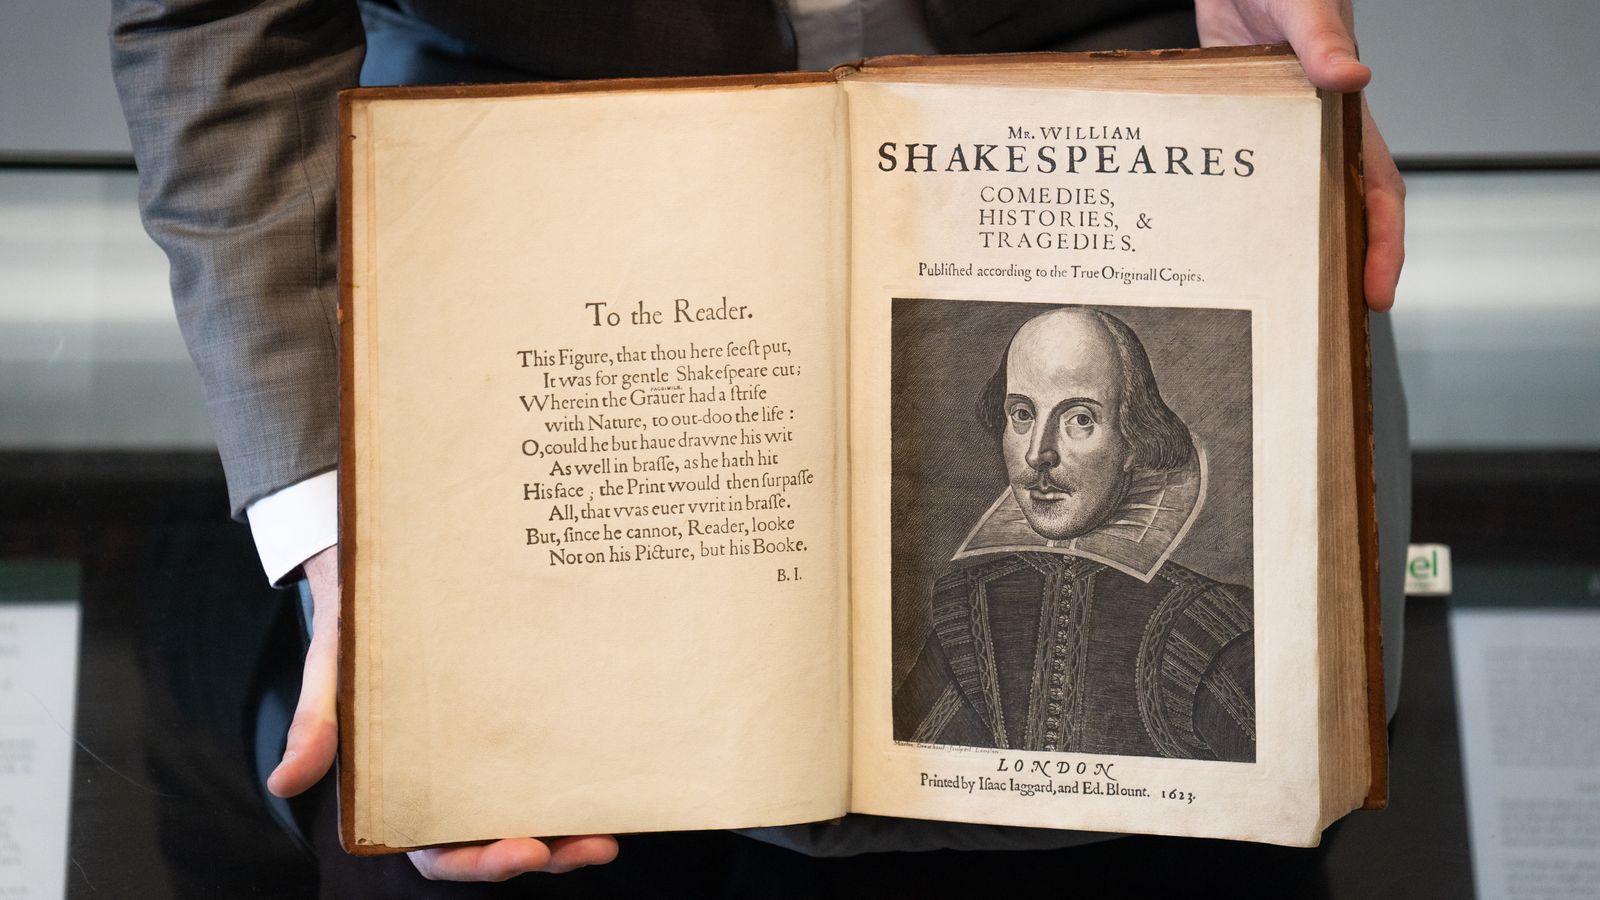 Florida school district to only teach excerpts from Shakespeare under new regulations